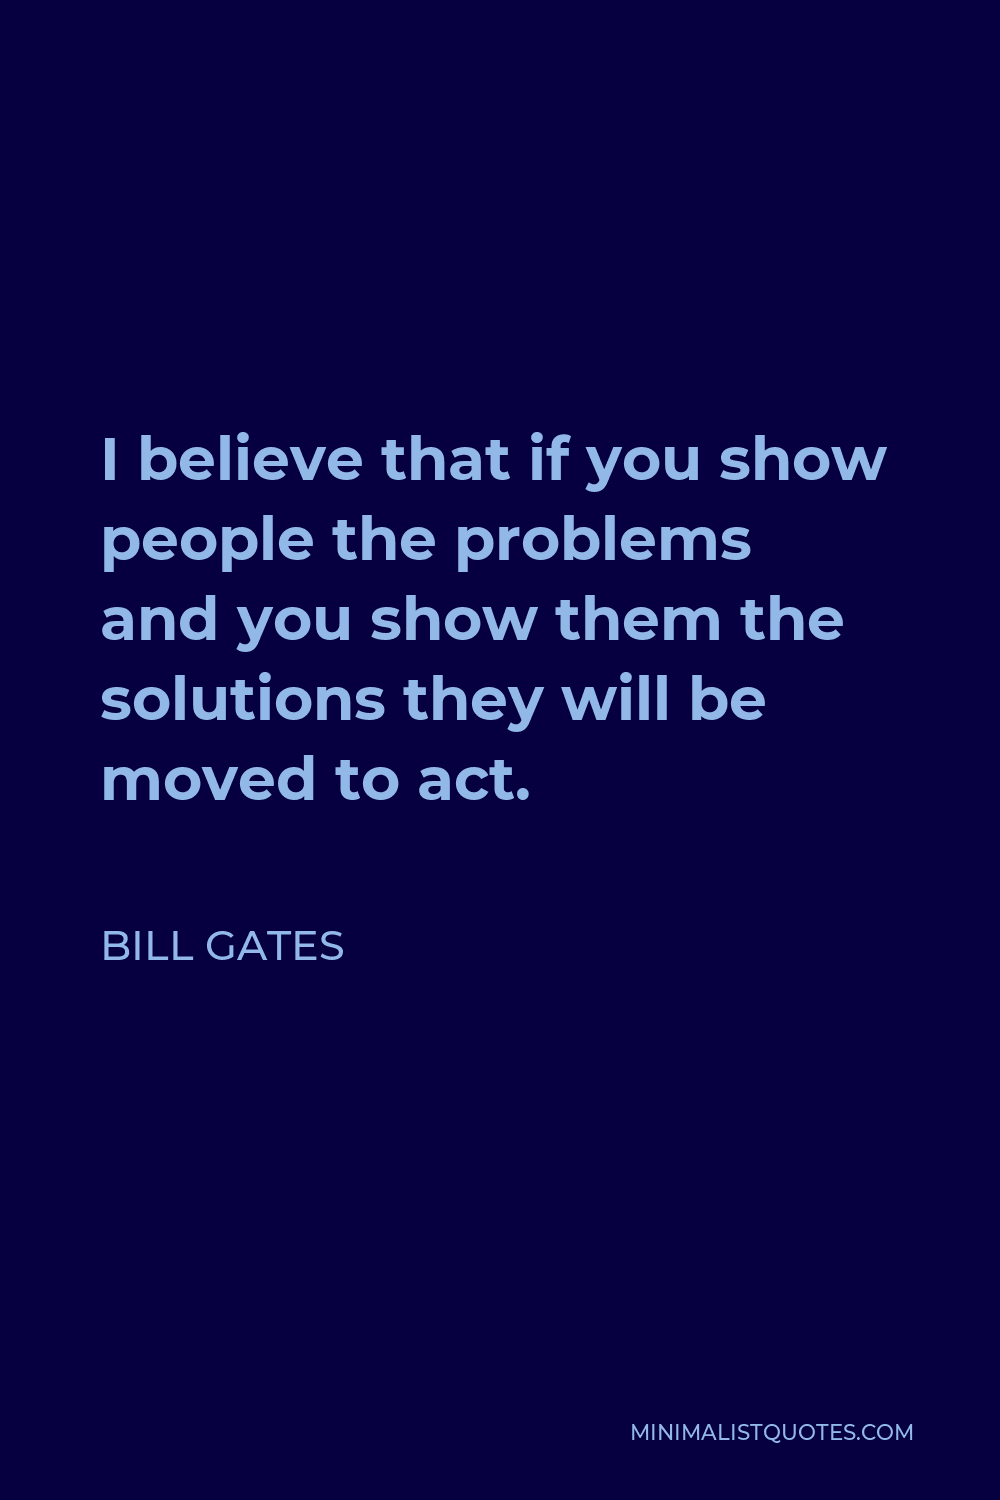 Bill Gates Quote - I believe that if you show people the problems and you show them the solutions they will be moved to act.